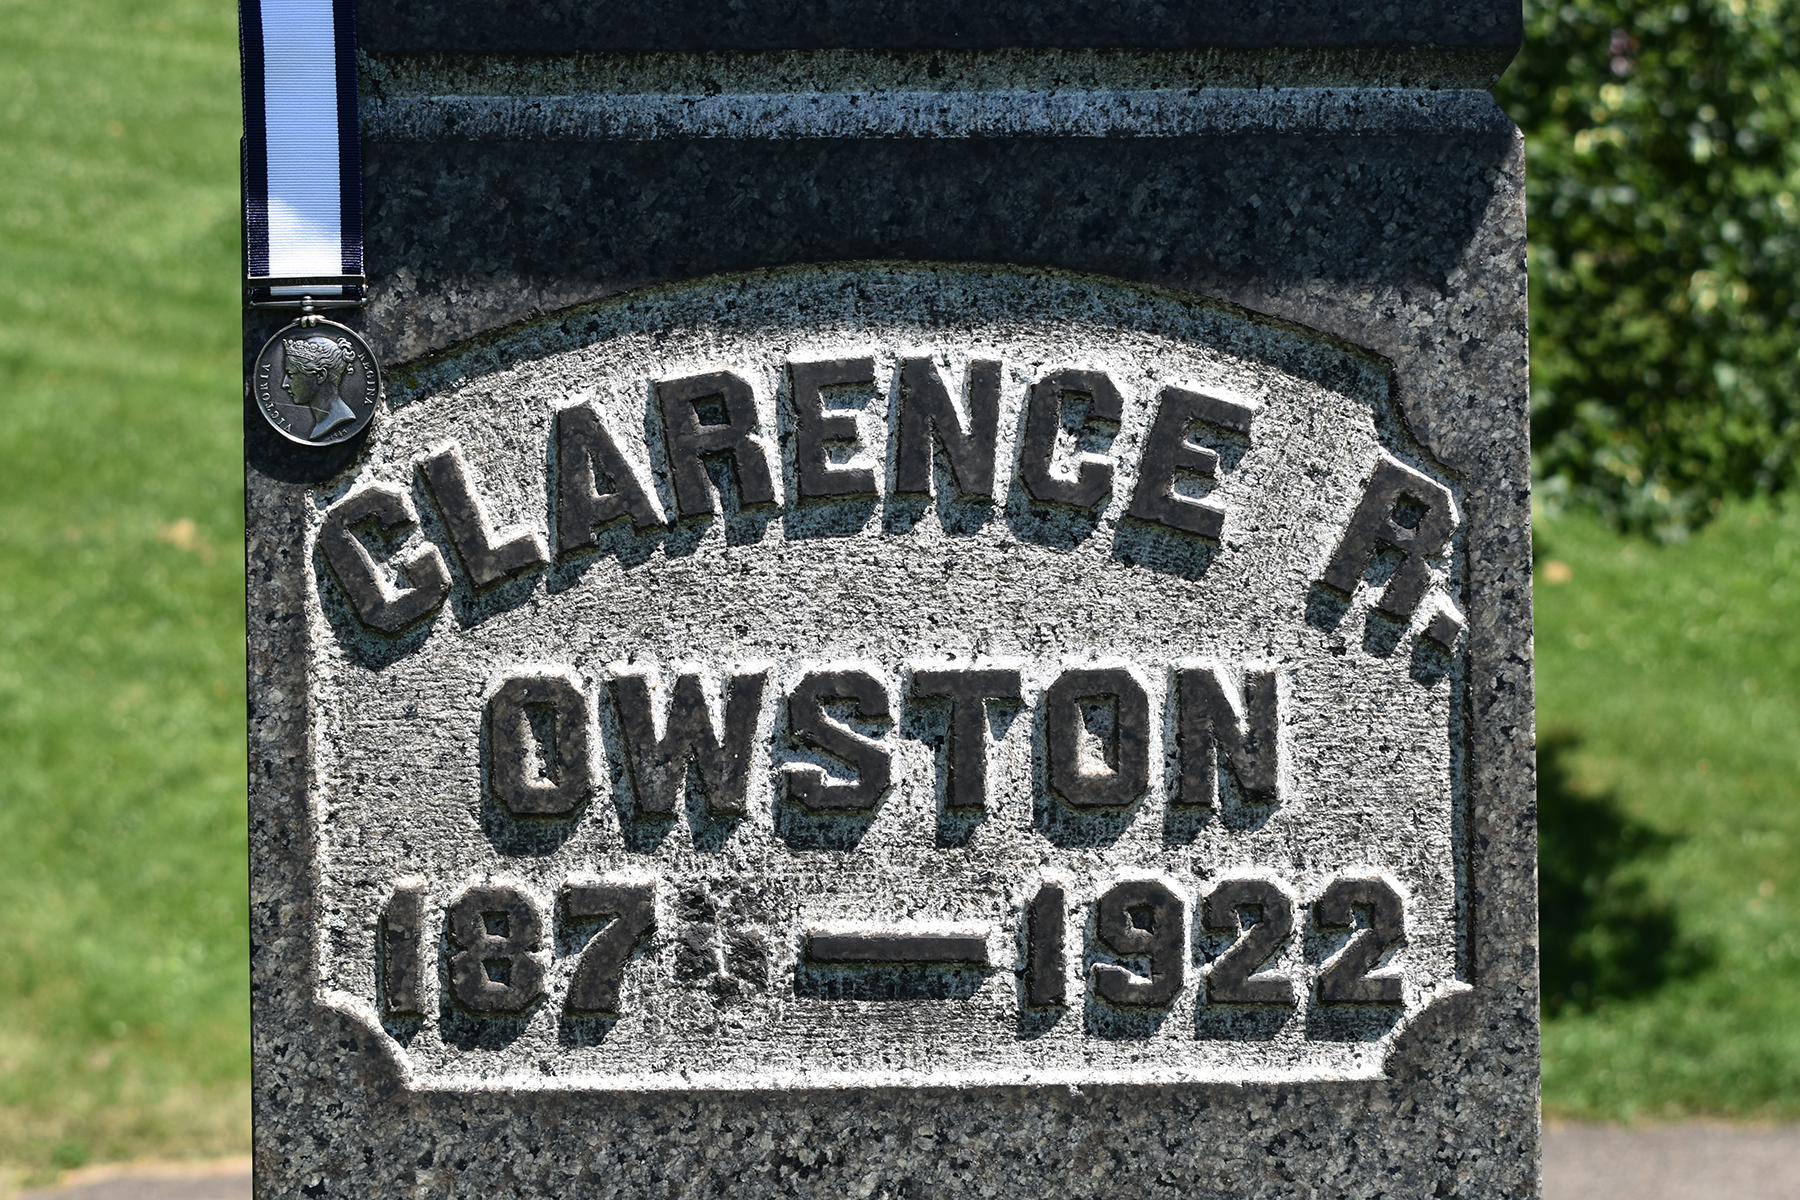 Clarence_R_Owston02